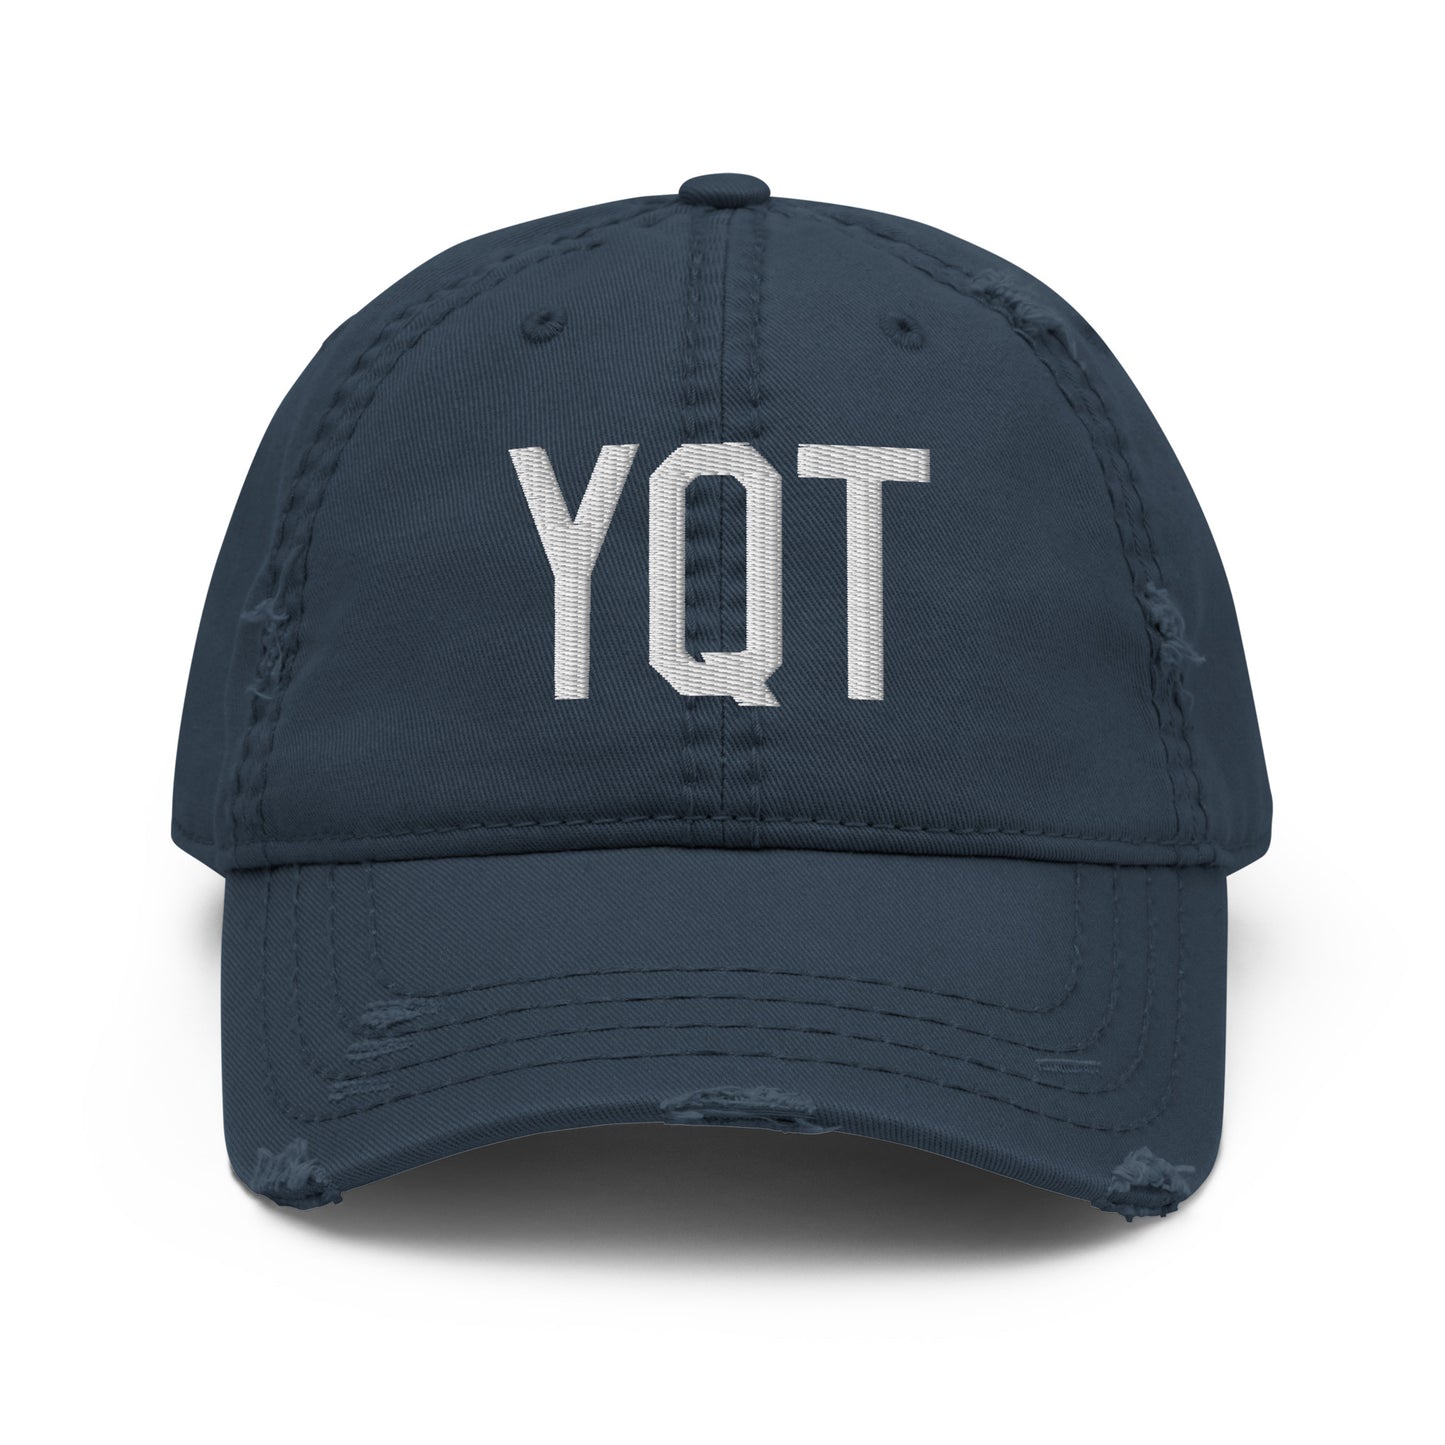 Airport Code Distressed Hat - White • YQT Thunder Bay • YHM Designs - Image 13